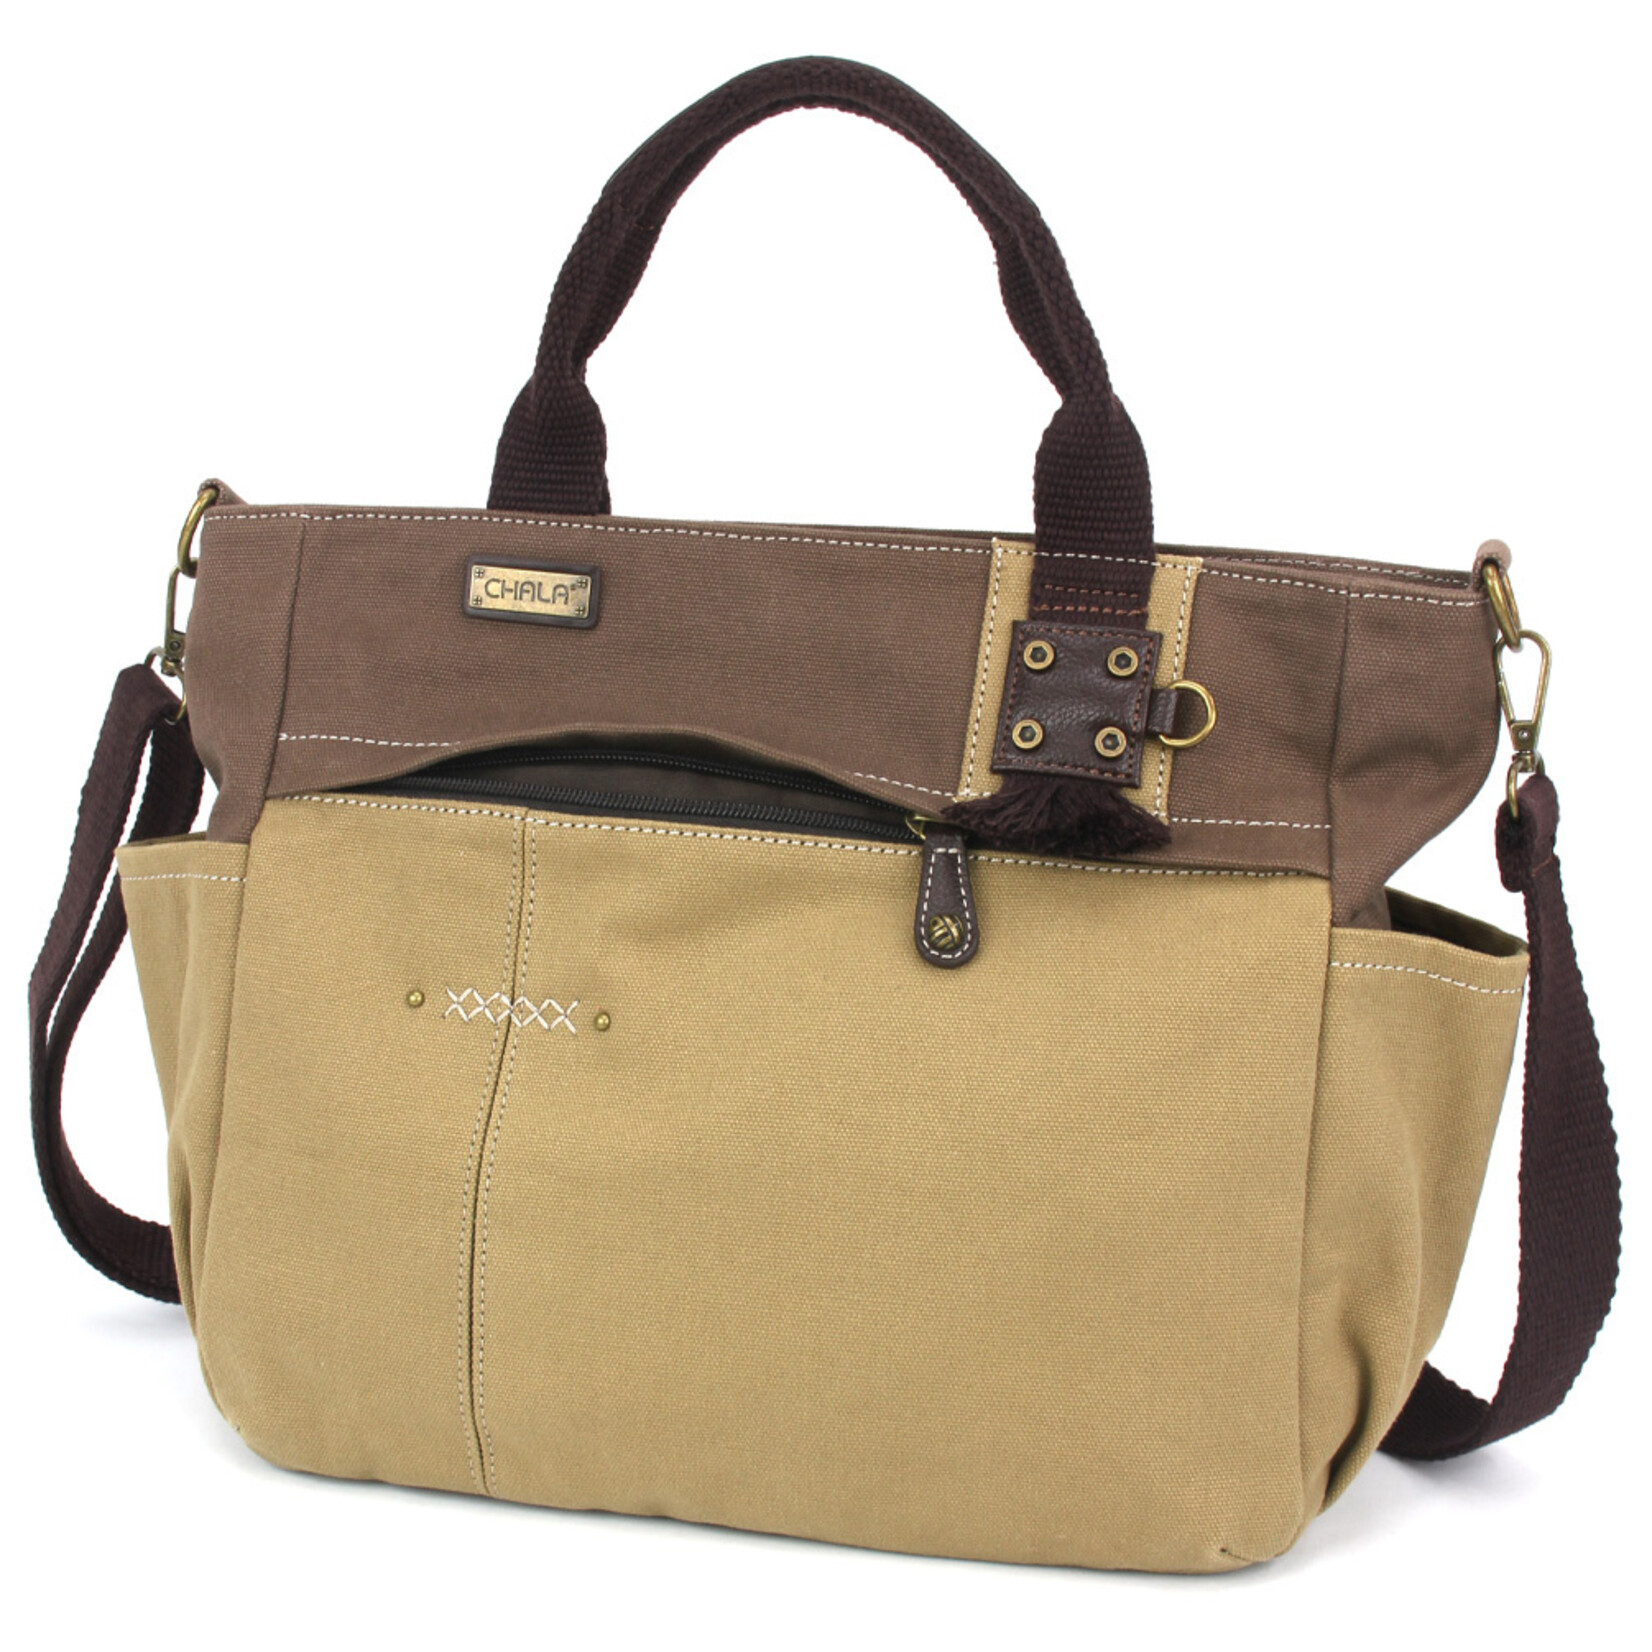 Chala Multi Pocket Tote - Olive - Charming Charms Daisy / Hope